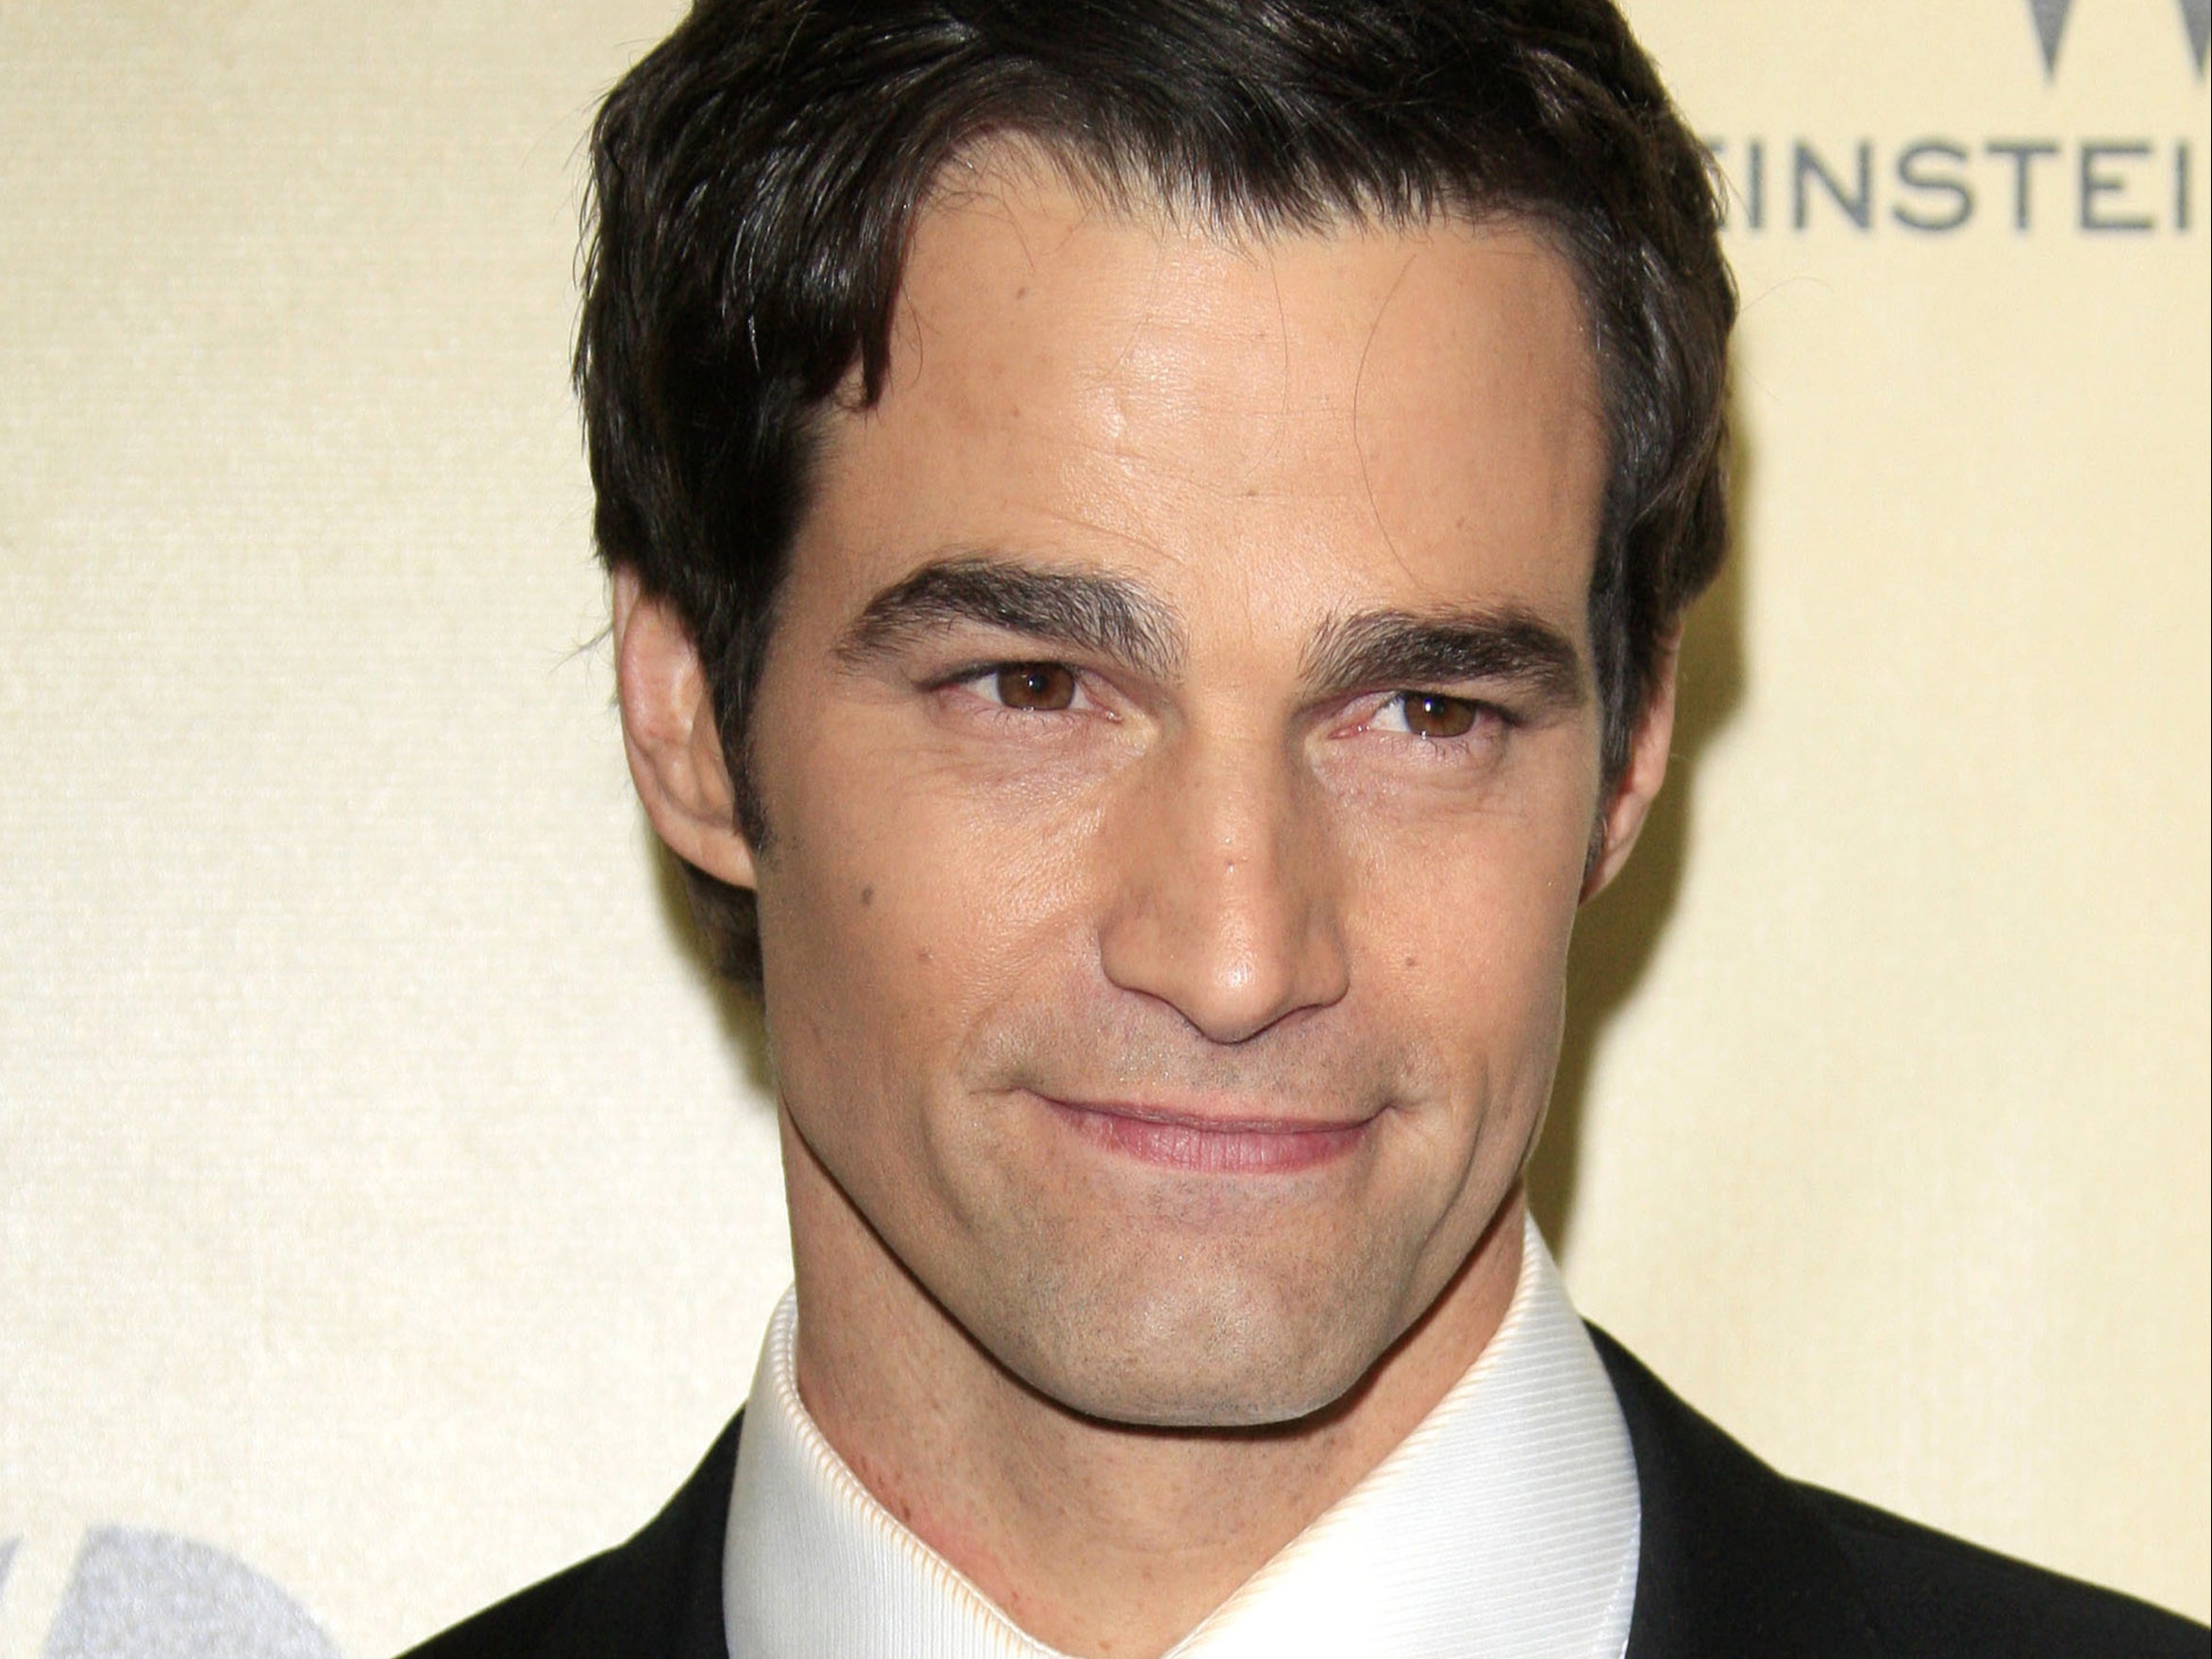 Rob Marciano has allegedly been banned’ from the ‘GMA’ studio